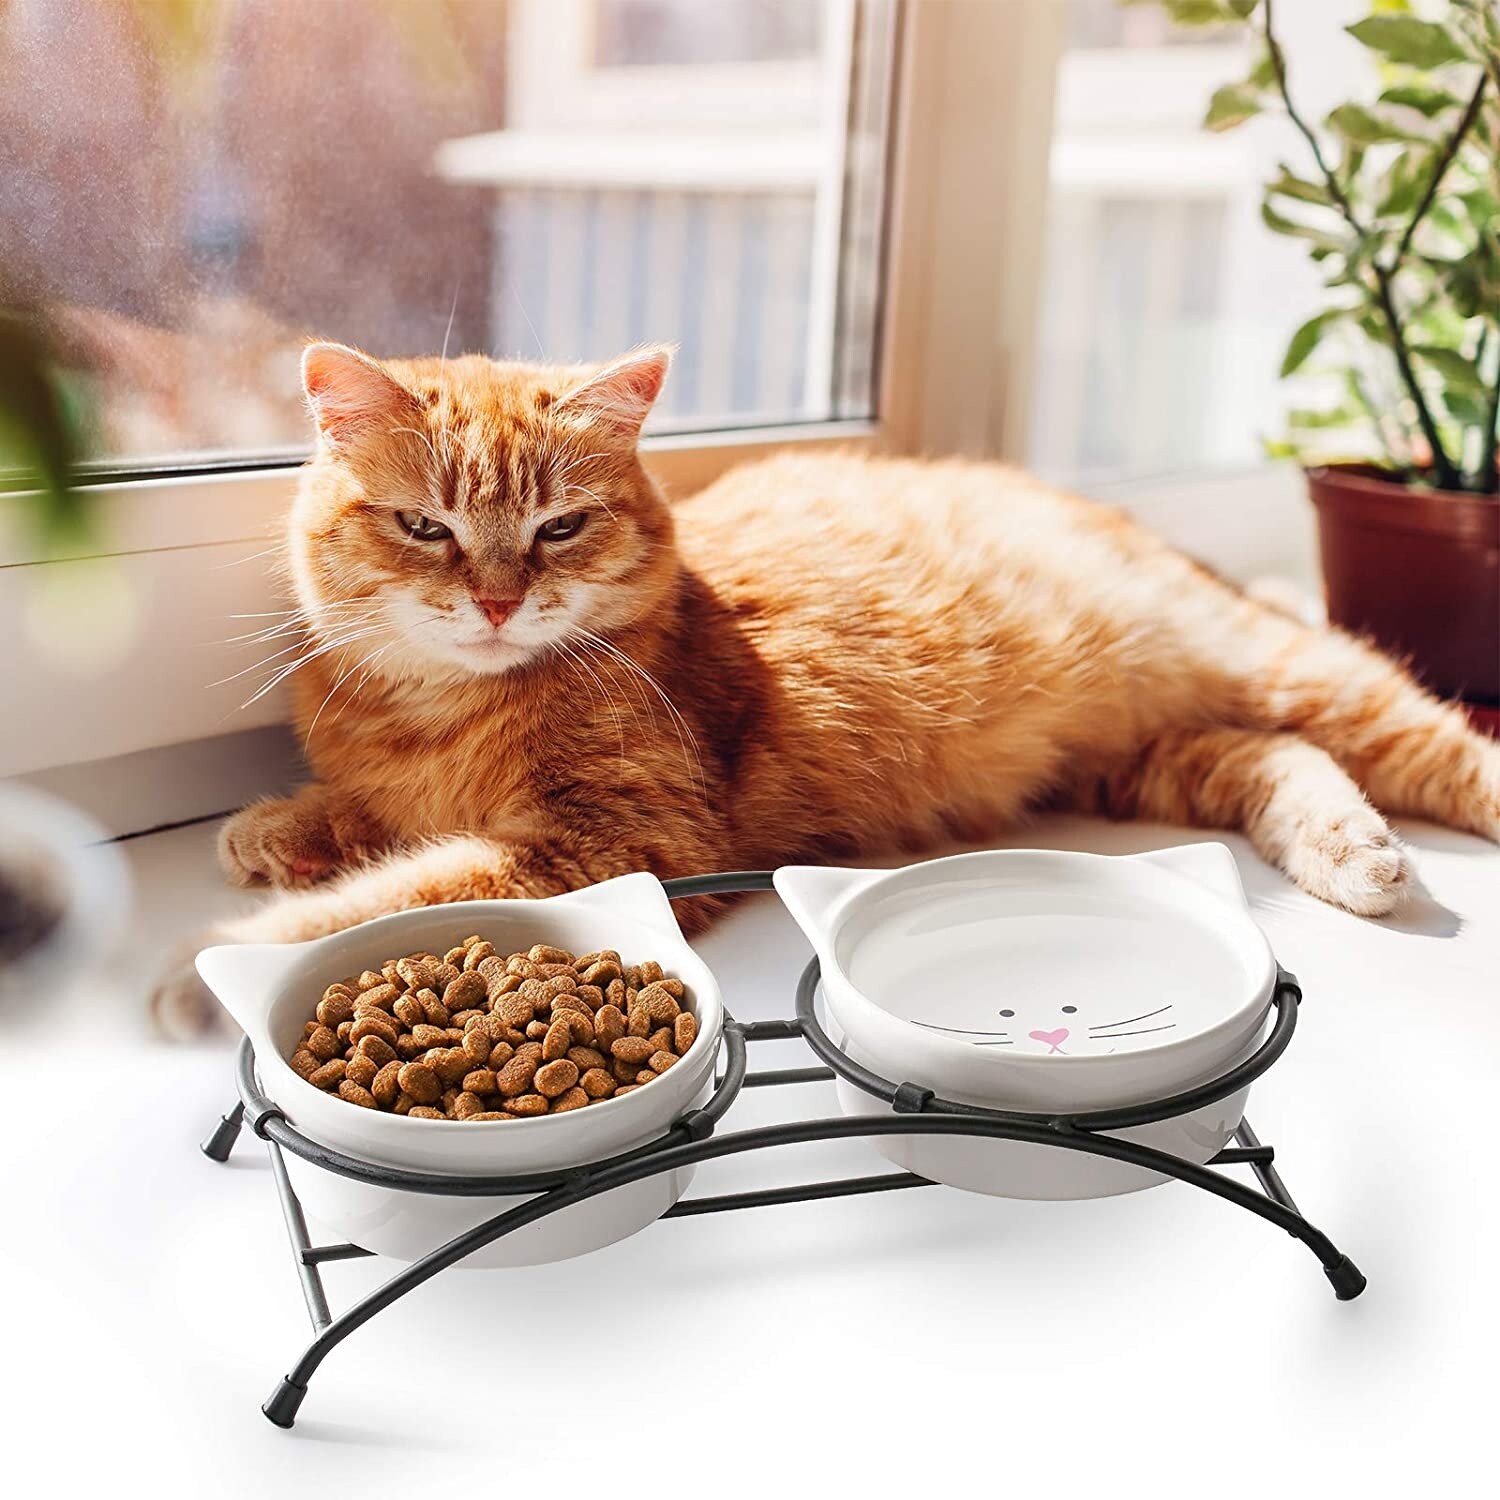 https://ak1.ostkcdn.com/images/products/is/images/direct/6a79747d34abc613a4920419ffca301197d62e6c/Y-YHY-Cat-Food-Bowls%2C-Raised-Cat-Bowls-for-Food-and-Water%2C-Ceramic-Cat-Bowls-Elevated%2C-Cat-Dishes-for-Cat-or-Small-Dogs.jpg